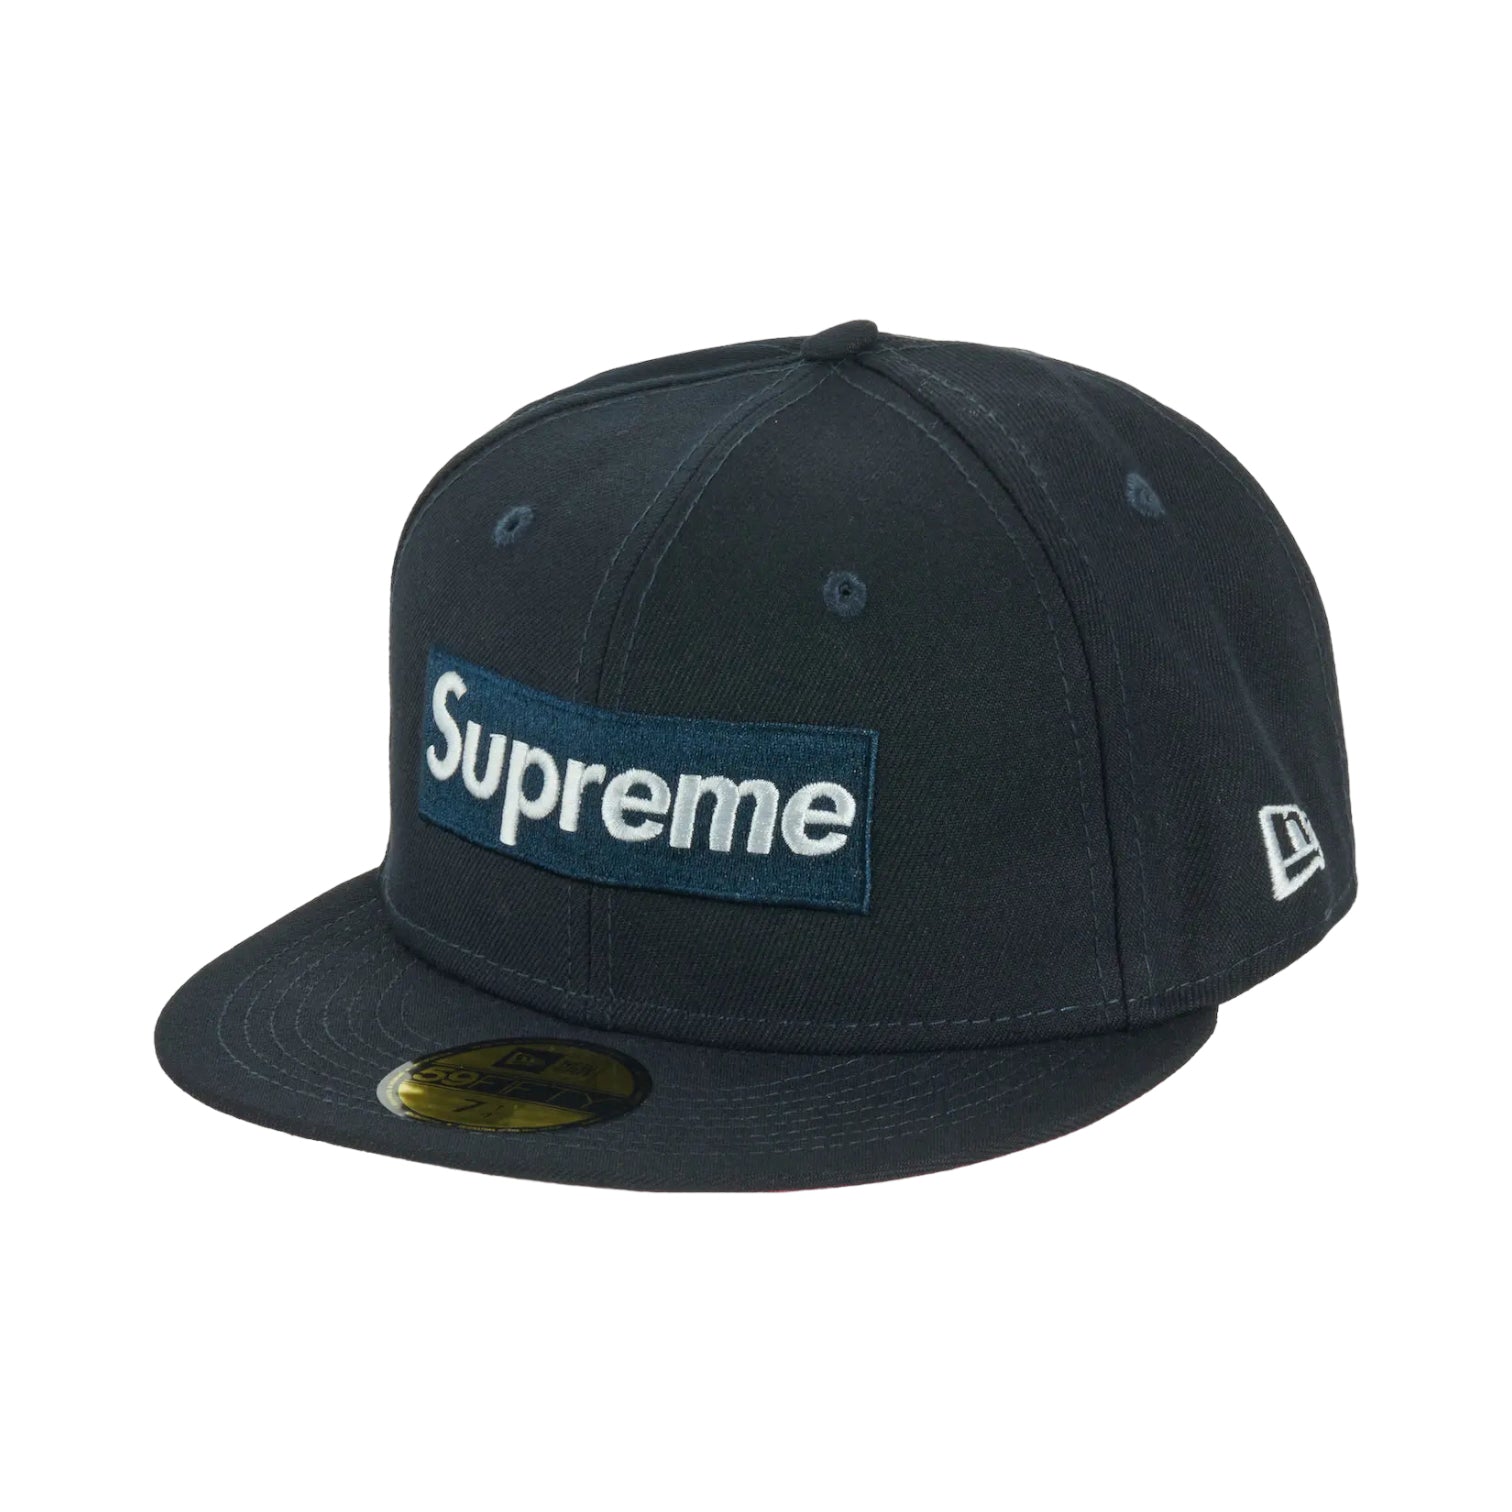 Supreme New Era No Comp Box Logo Now Available At YEG Exotic In